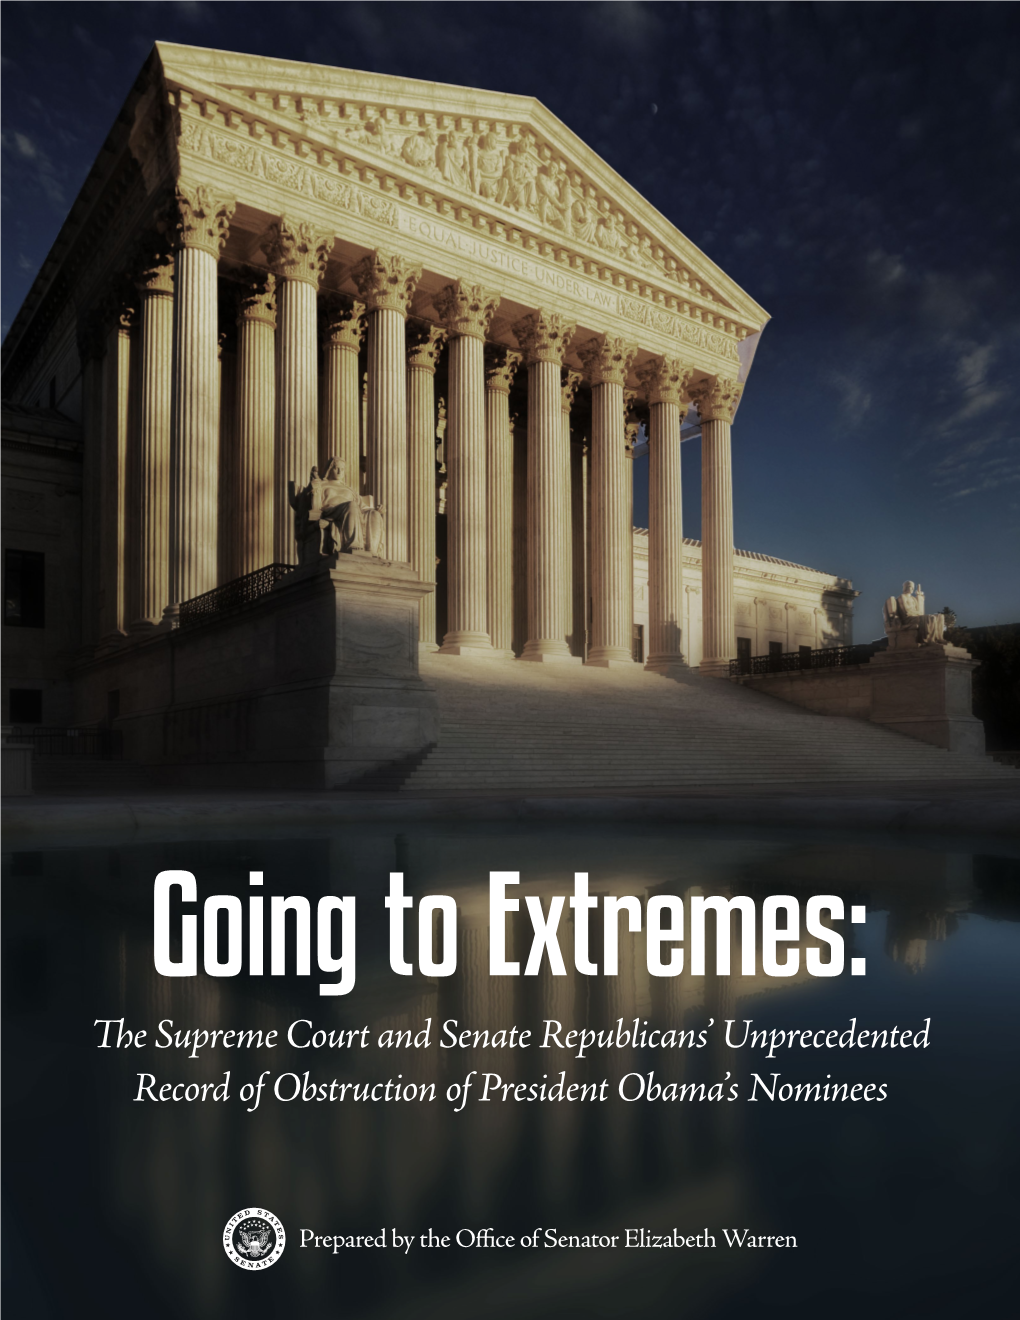 Going to Extremes: the Supreme Court and Senate Republicans’ Unprecedented Record of Obstruction of President Obama’S Nominees